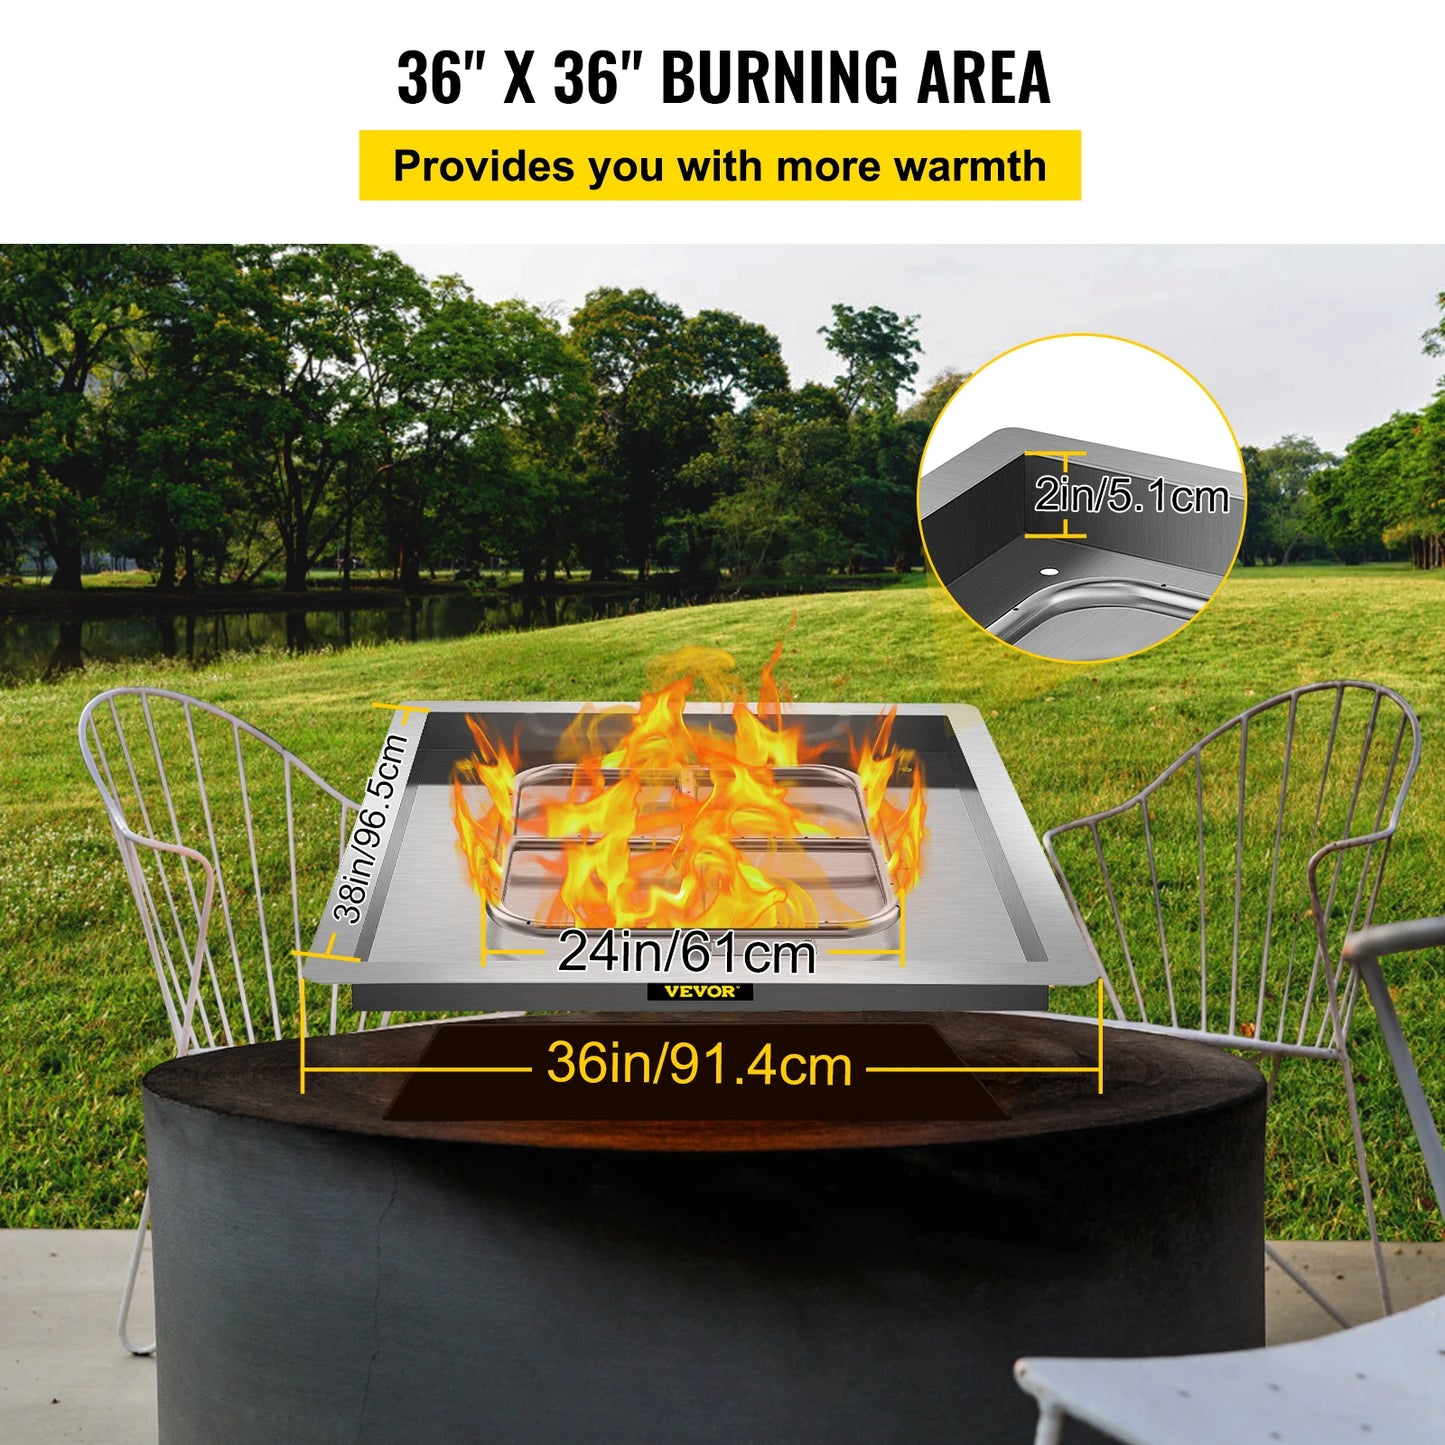 VEVOR Drop in Fire Pit Pan Gas Plate 18X18/36x36 Stainless Steel Big Combustion Area for DIY in Backyard